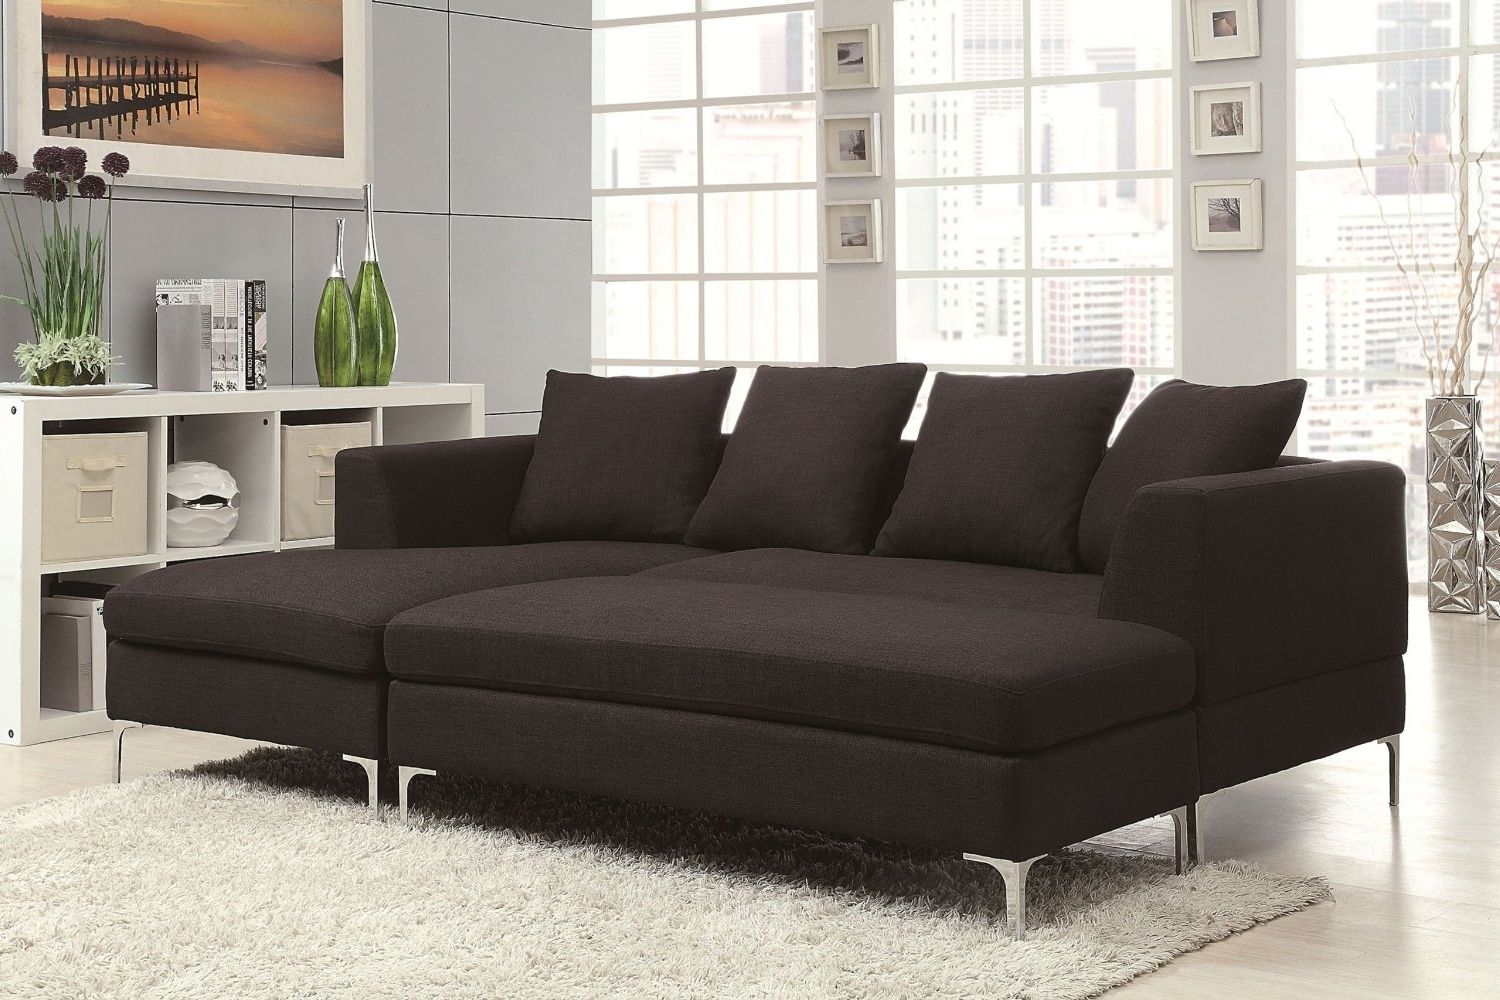 2018 Sectional Chaise Sofa – Home And Textiles Intended For Sectional Sofas With Chaise Lounge (View 9 of 15)